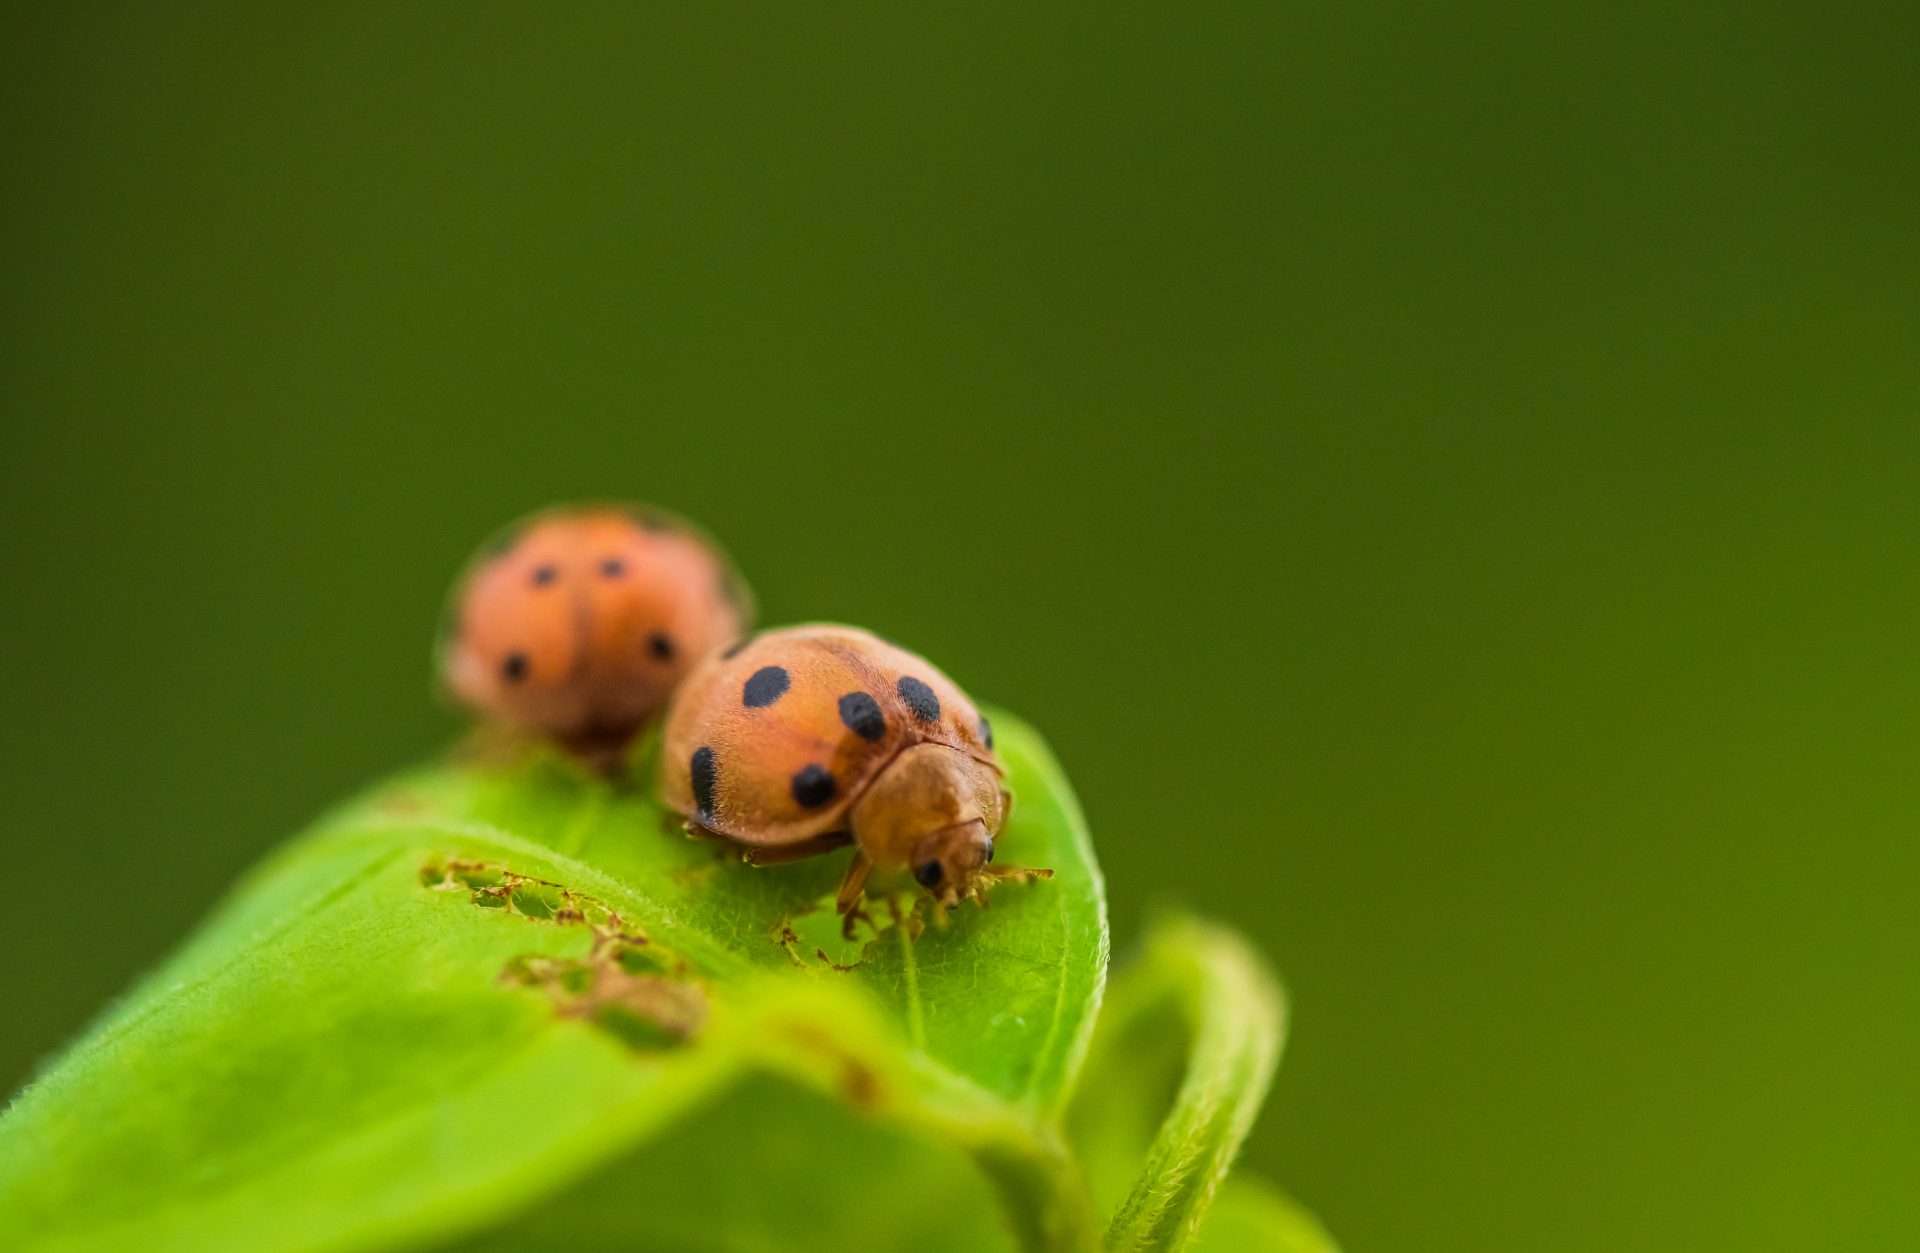 Two ladybugs together on a leaf.